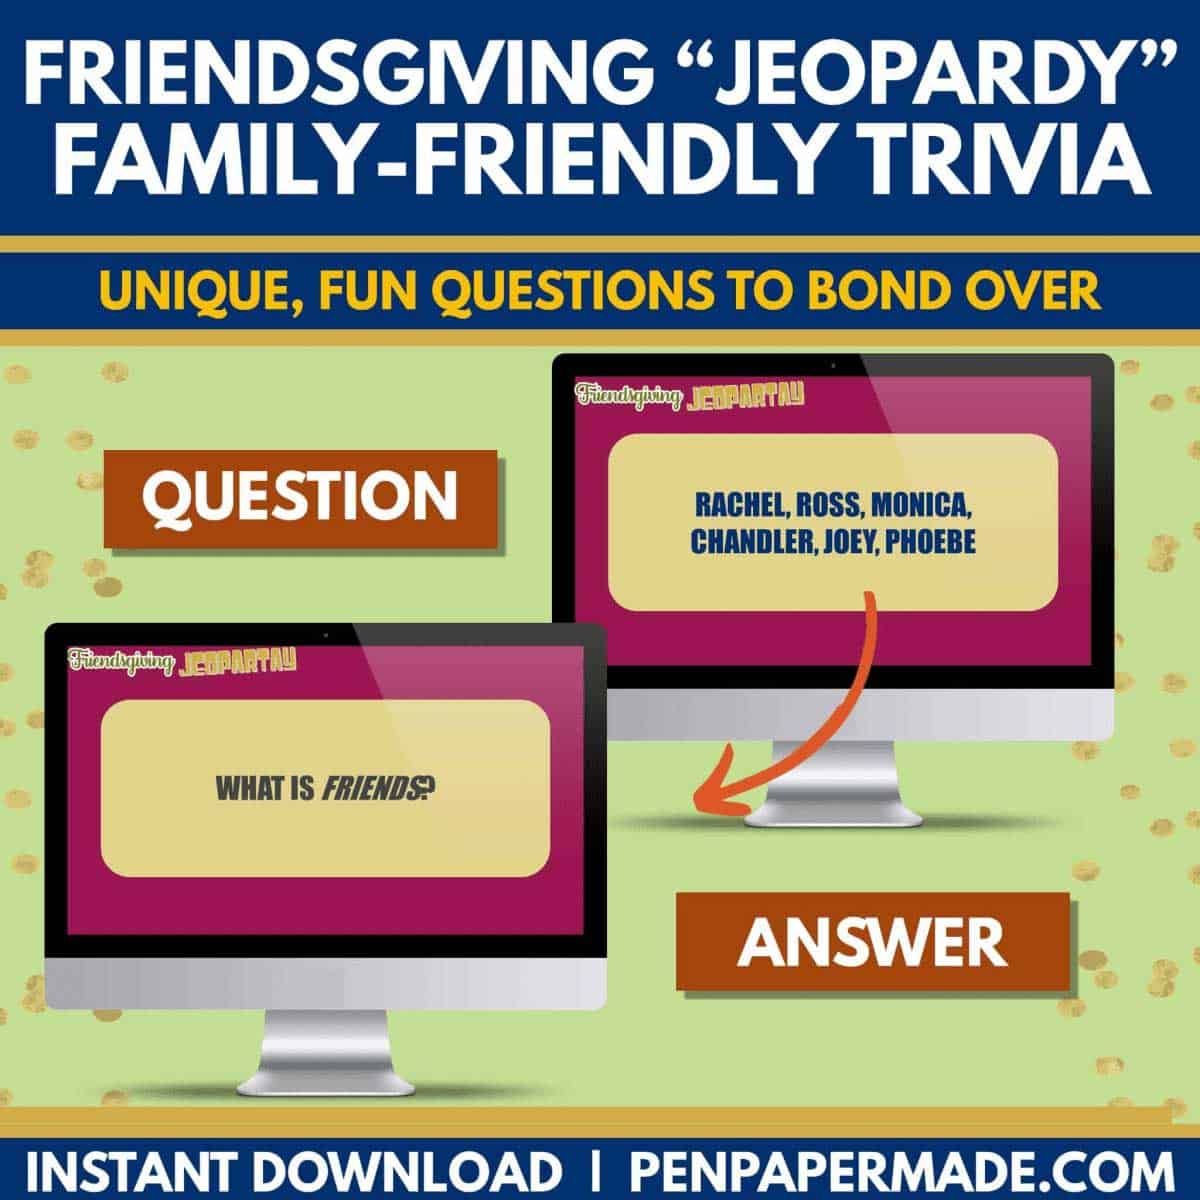 fun friendsgiving jeopardy questions like who are the six characters in the tv show friends?